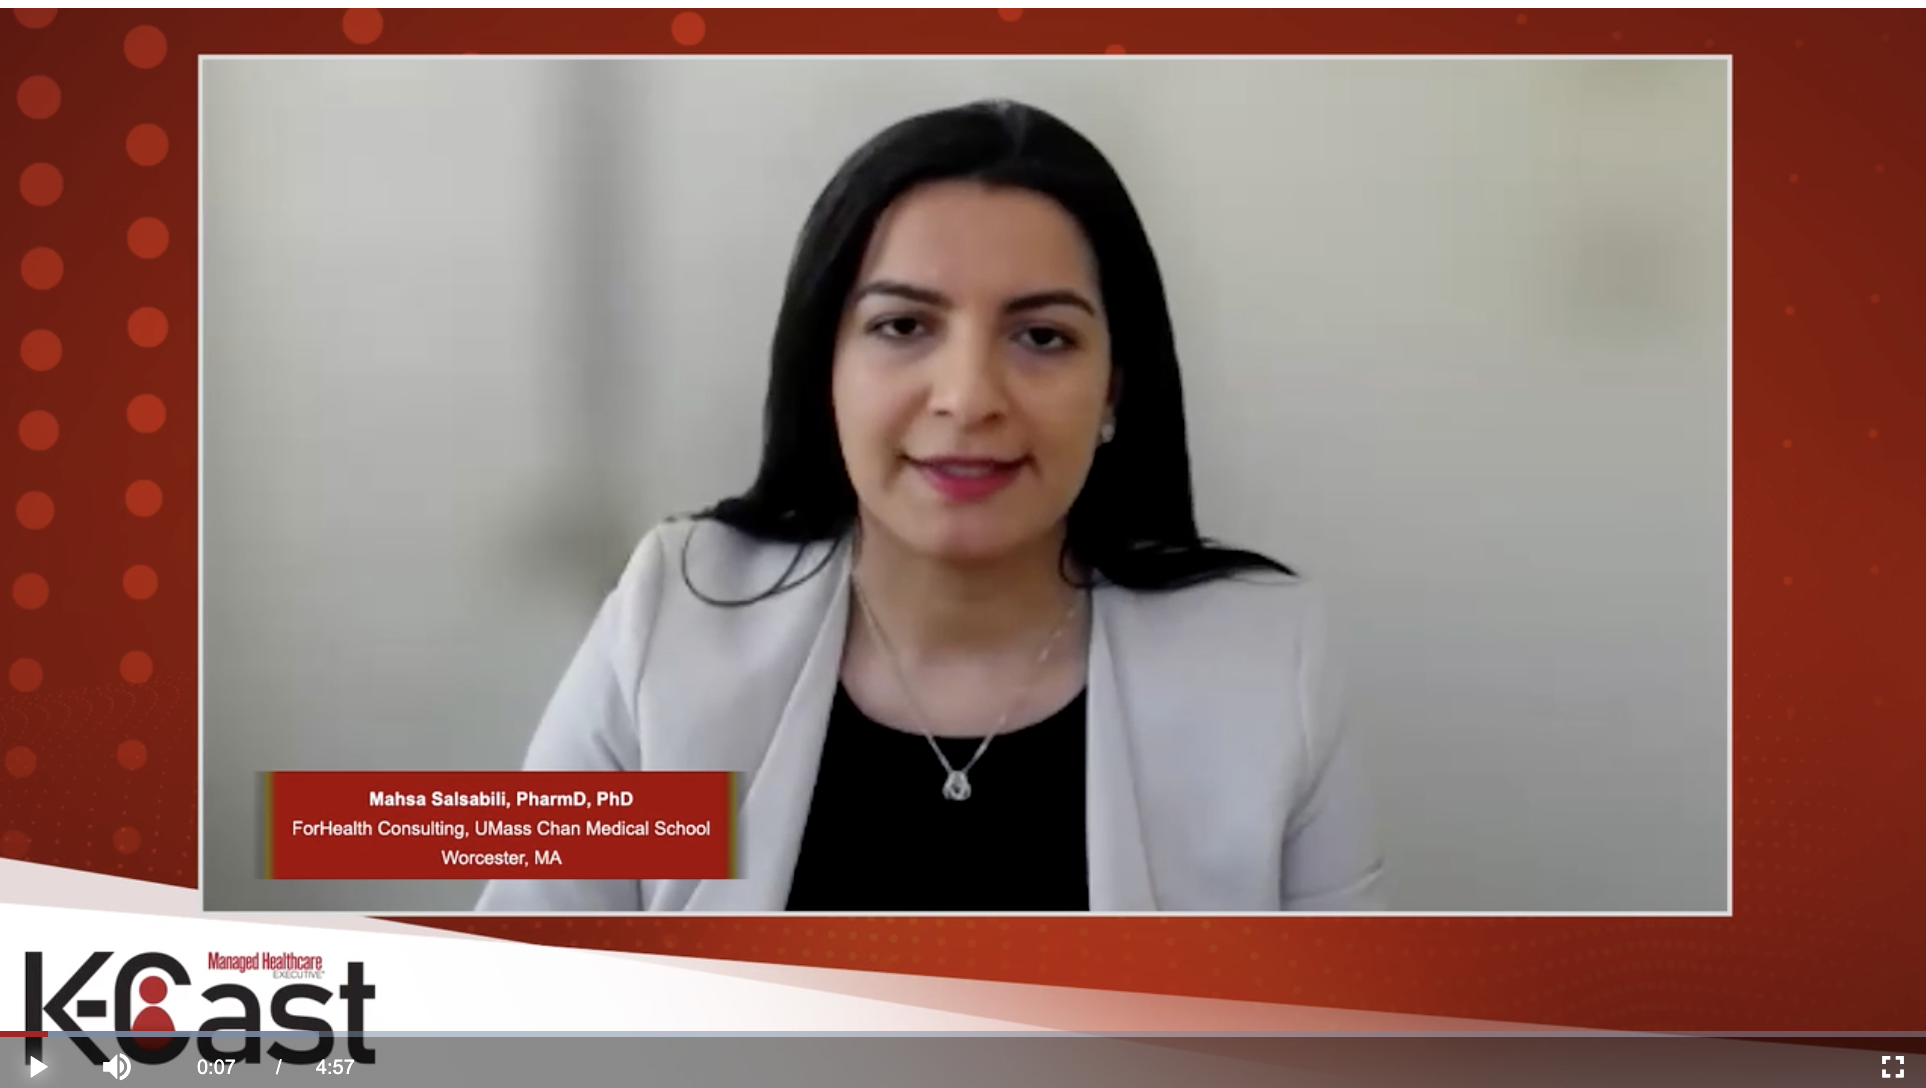 Mahsa Salsabili, PharmD, PhD, lead pharmacoeconomics specialist at ForHealth Consulting at UMass Chan Medical School, on the Managed Healthcare Executive K-Cast, discussing “Advancing Healthcare with Prescription Therapeutics.”